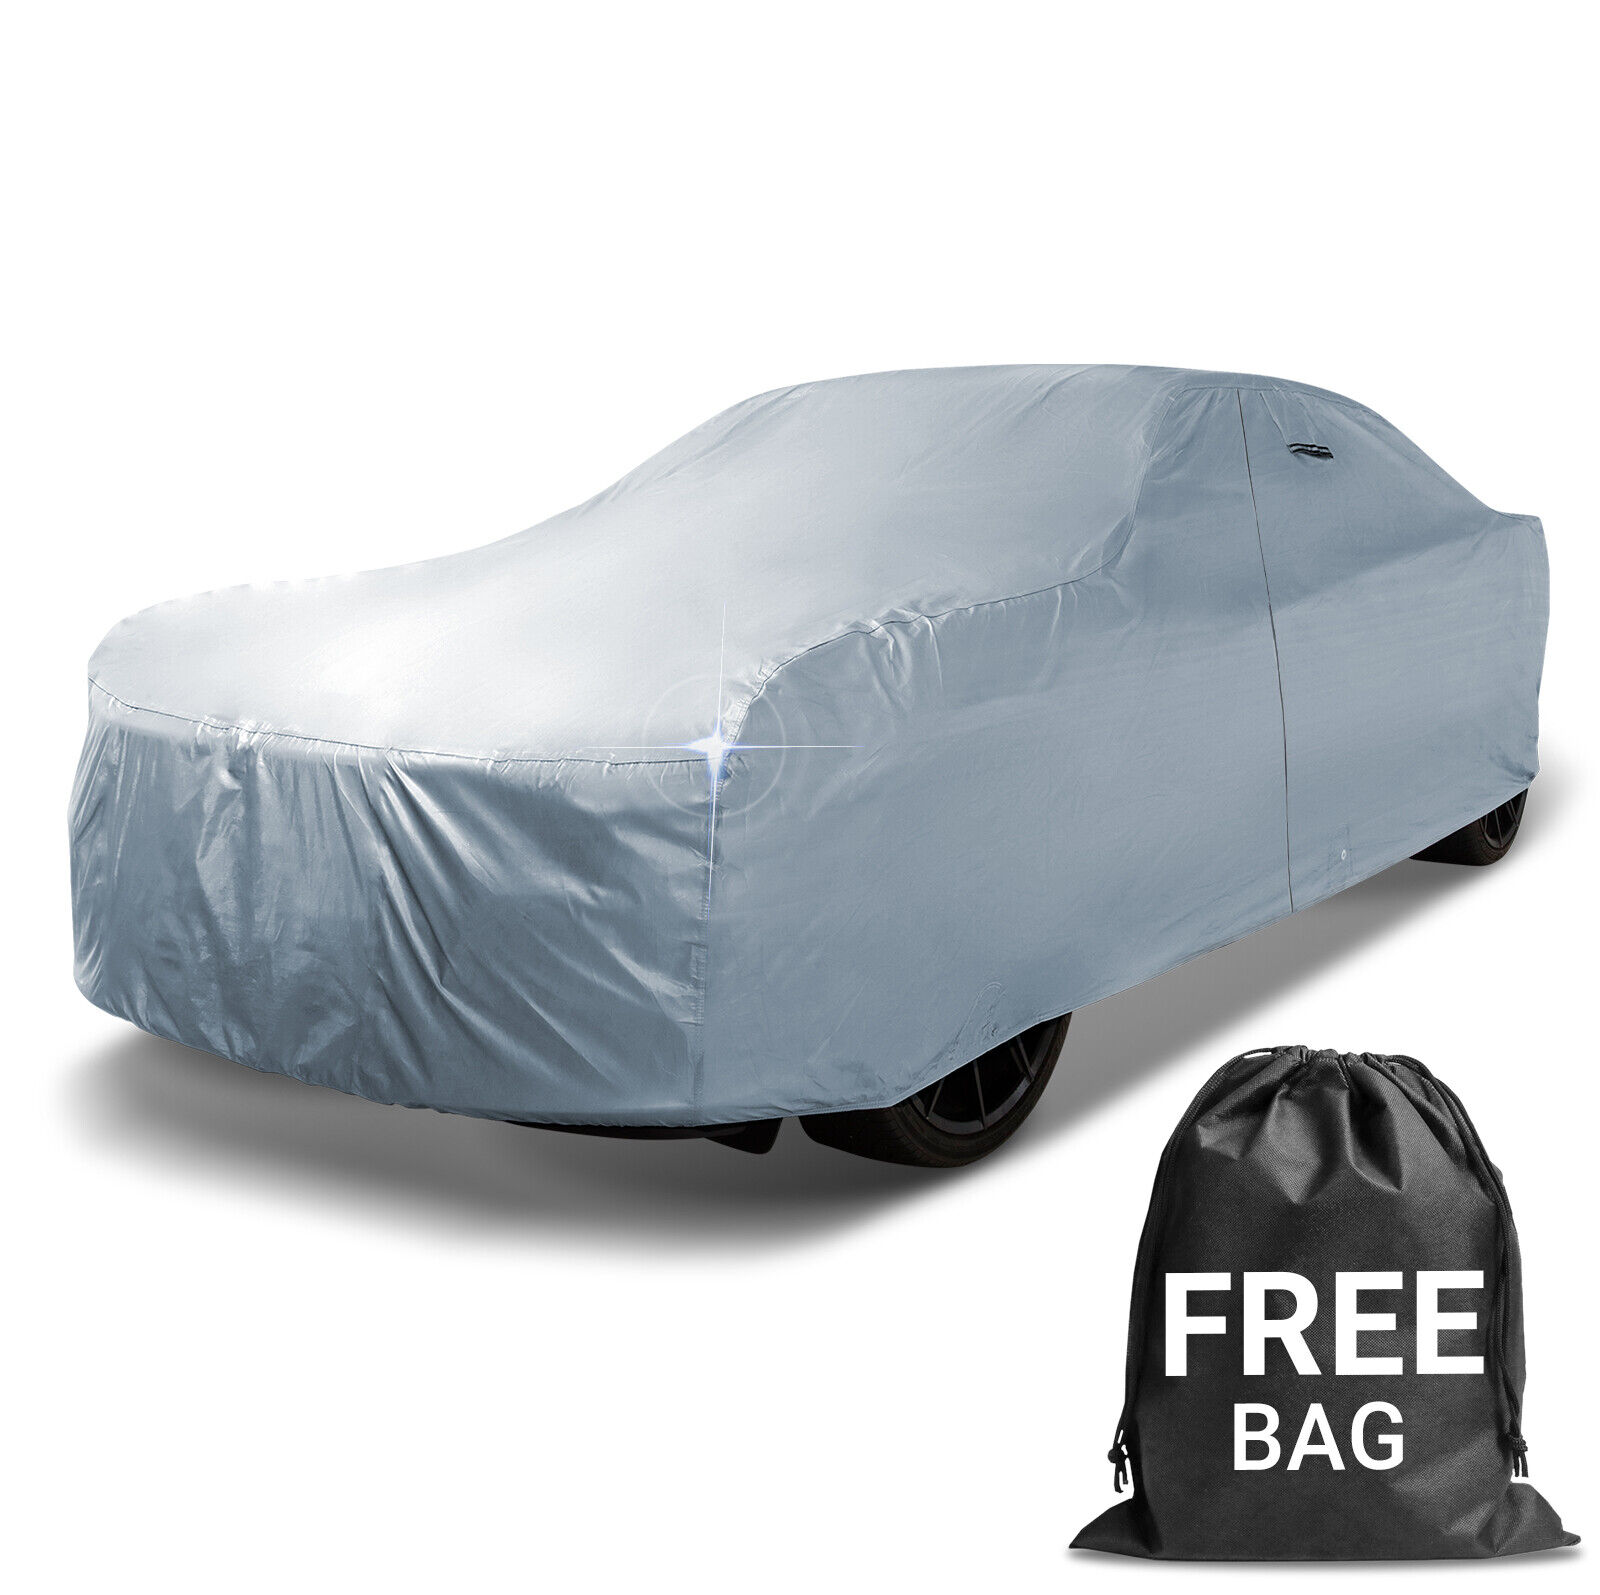 BUICK [ROADMASTER] Custom Waterproof Outdoor Car Cover - All Weather Protection